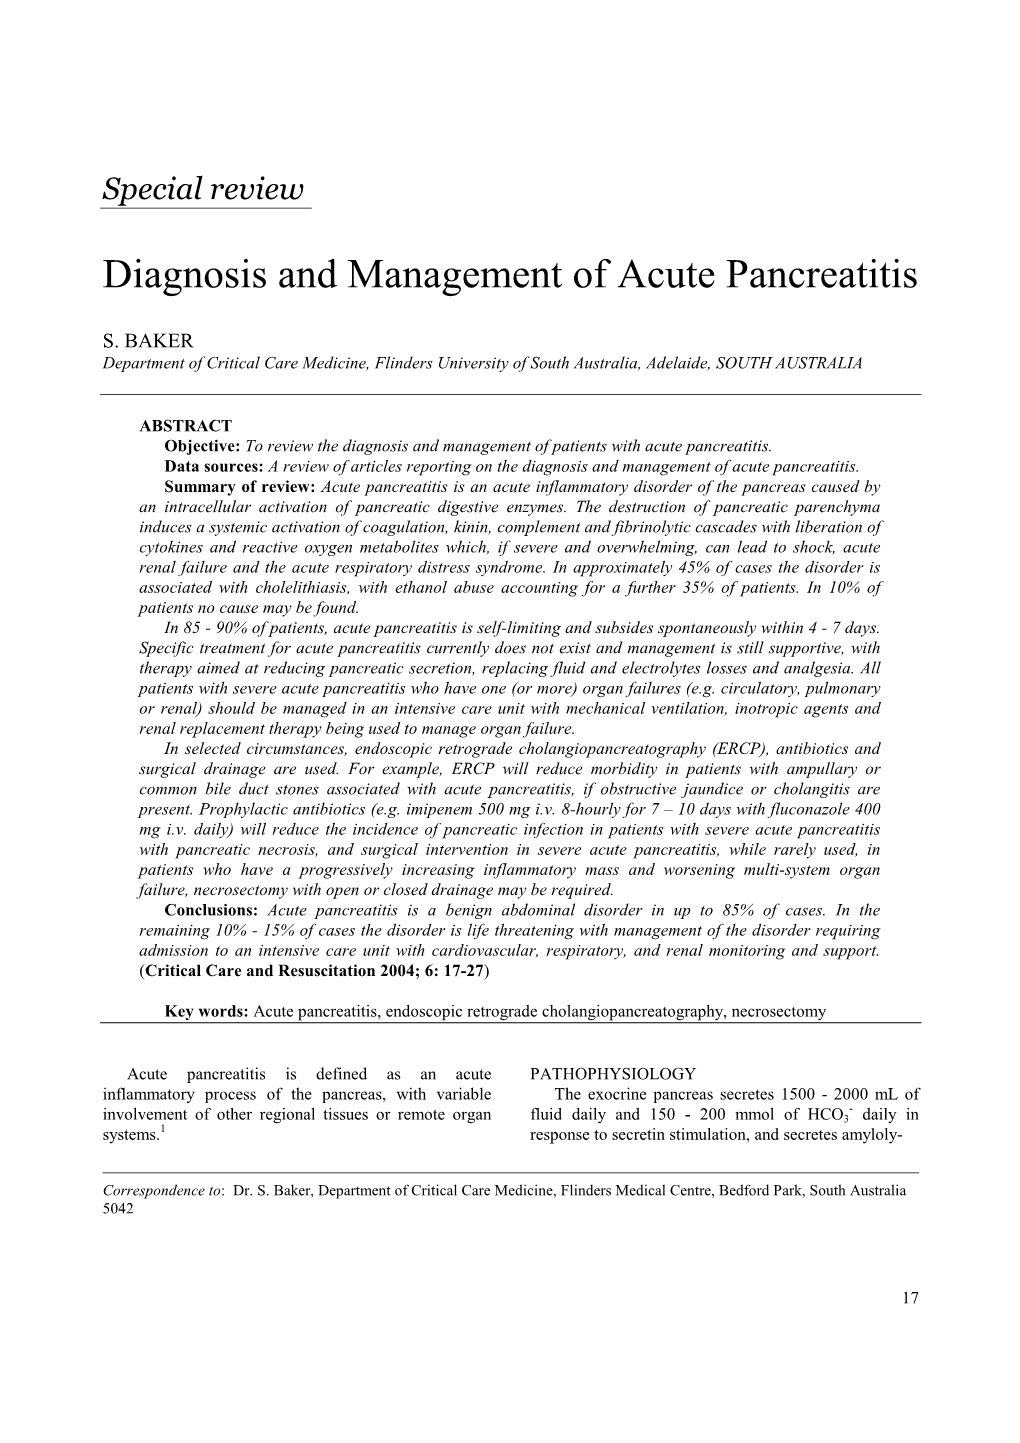 Diagnosis and Management of Acute Pancreatitis